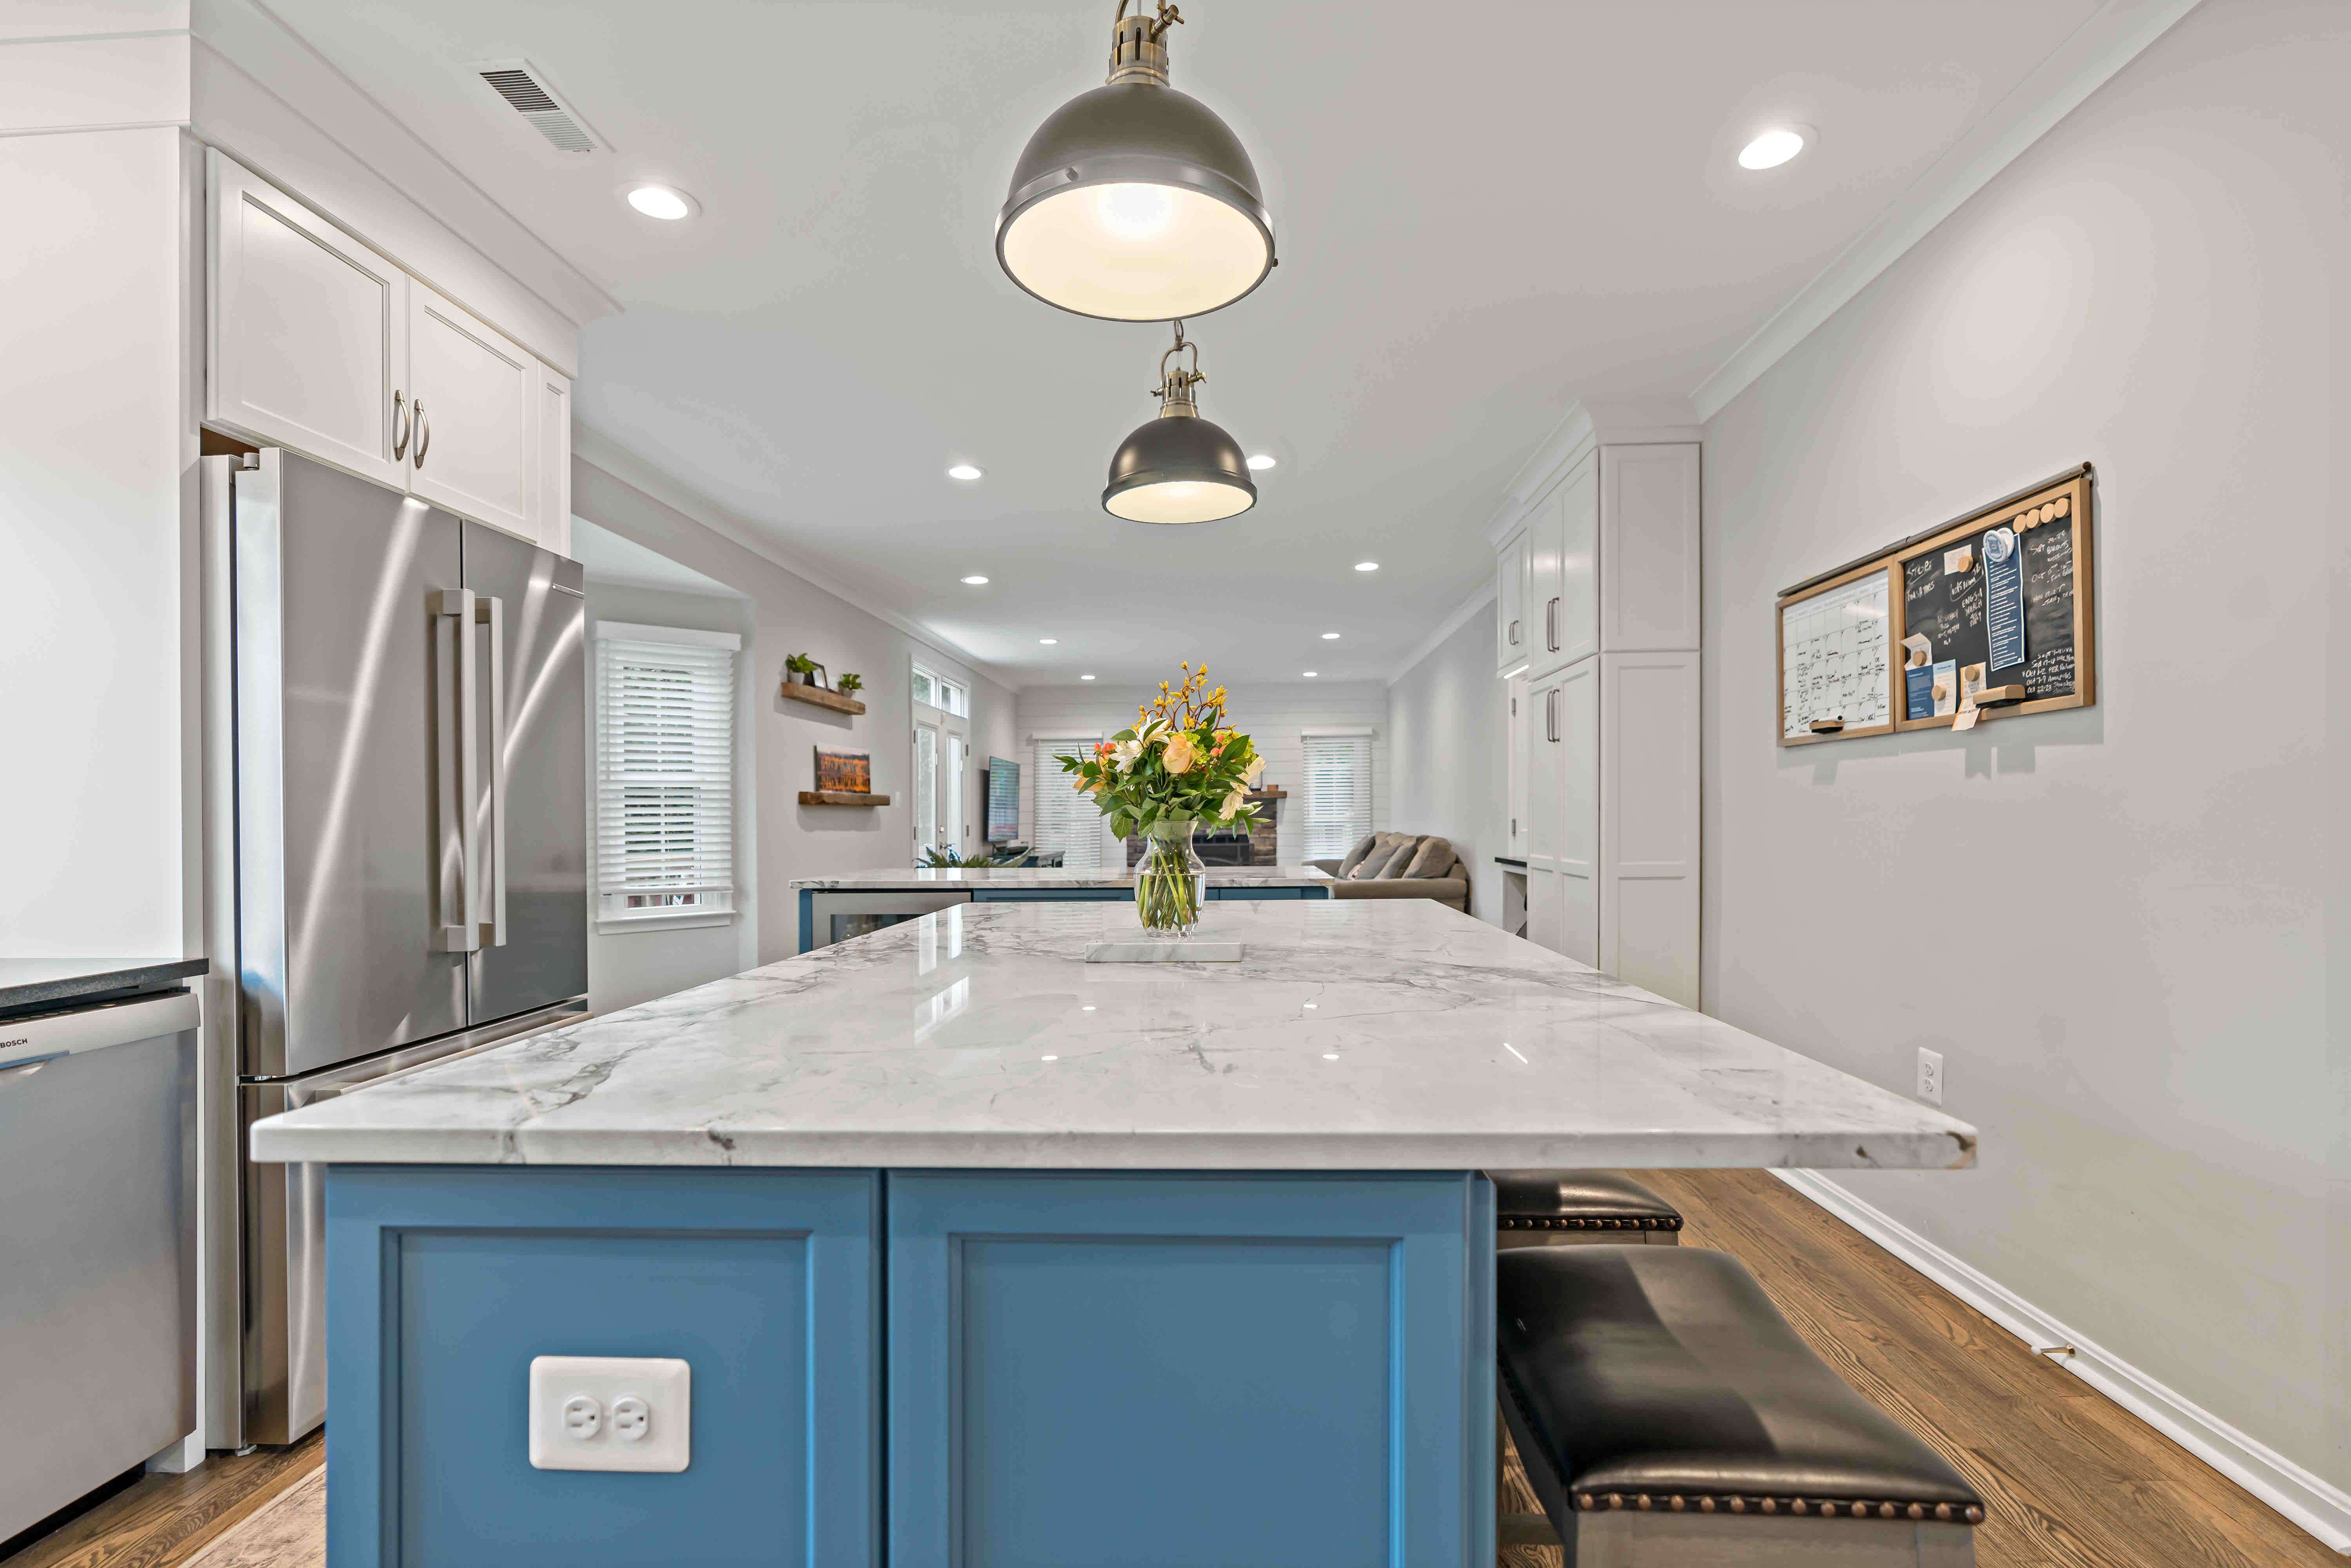 White kitchen with blue accent on kitchen islands and hard wood floors